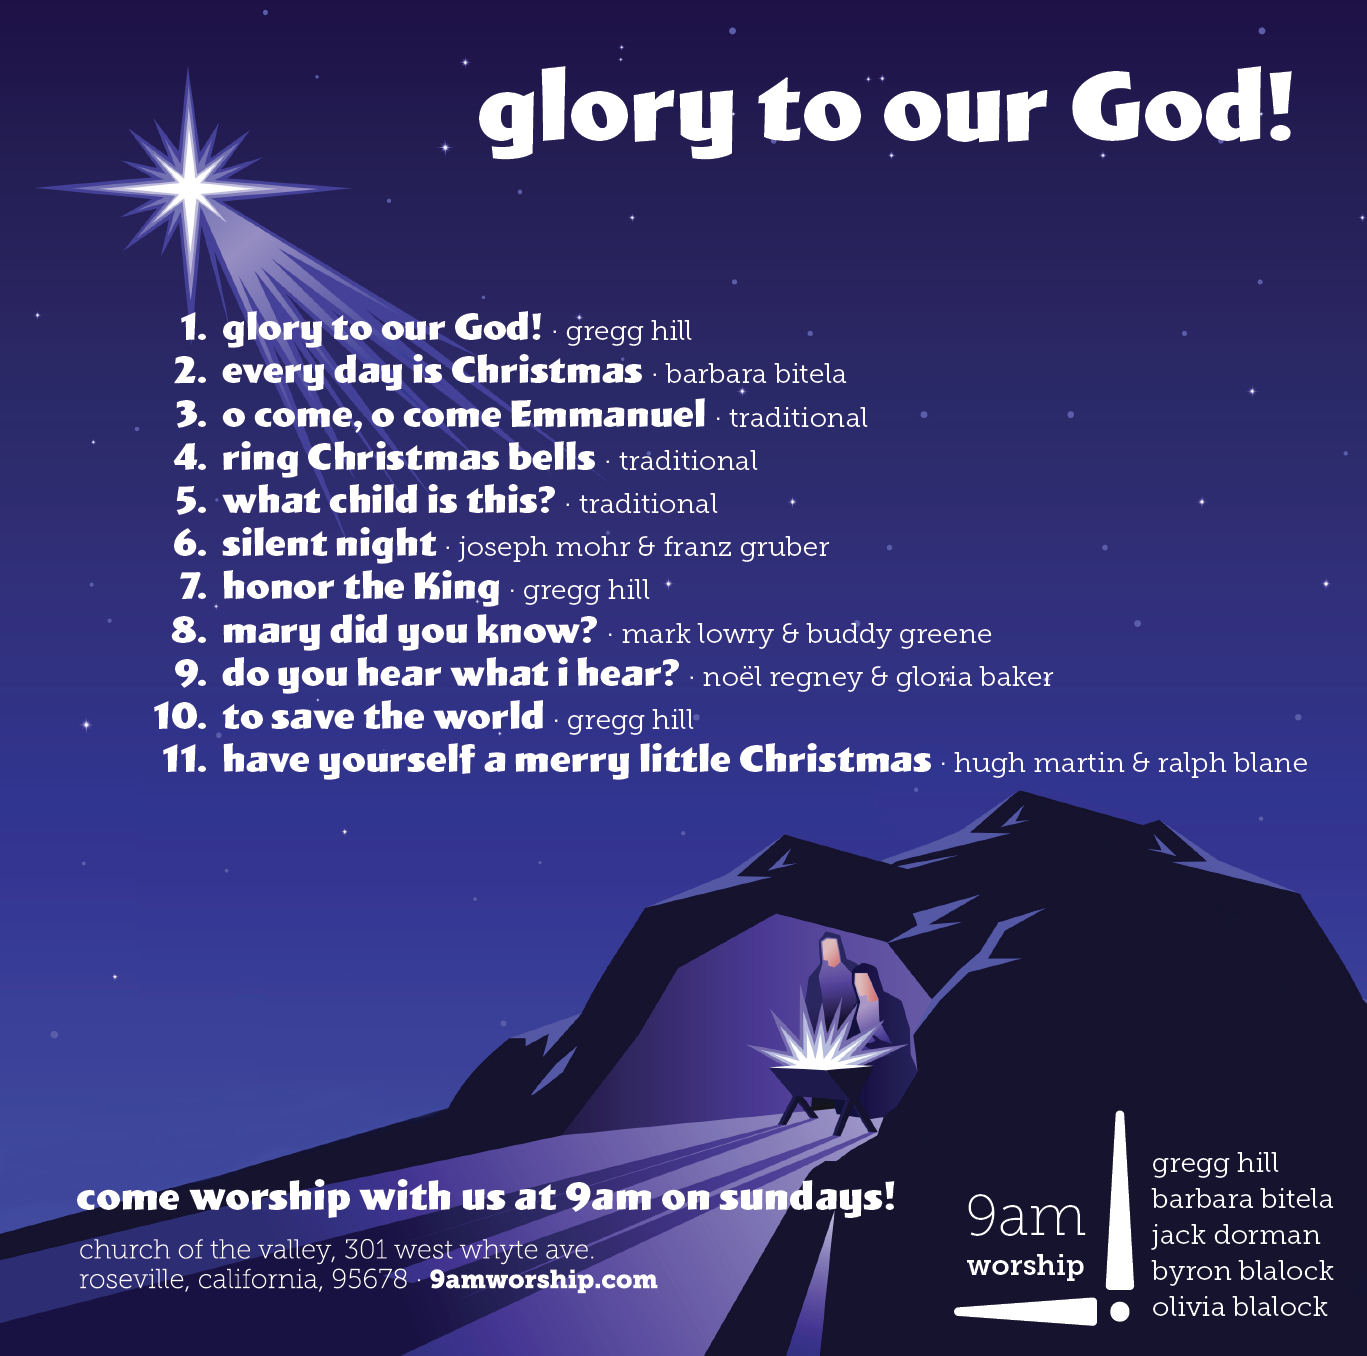 Album insert for "glory to our God!" by 9am worship